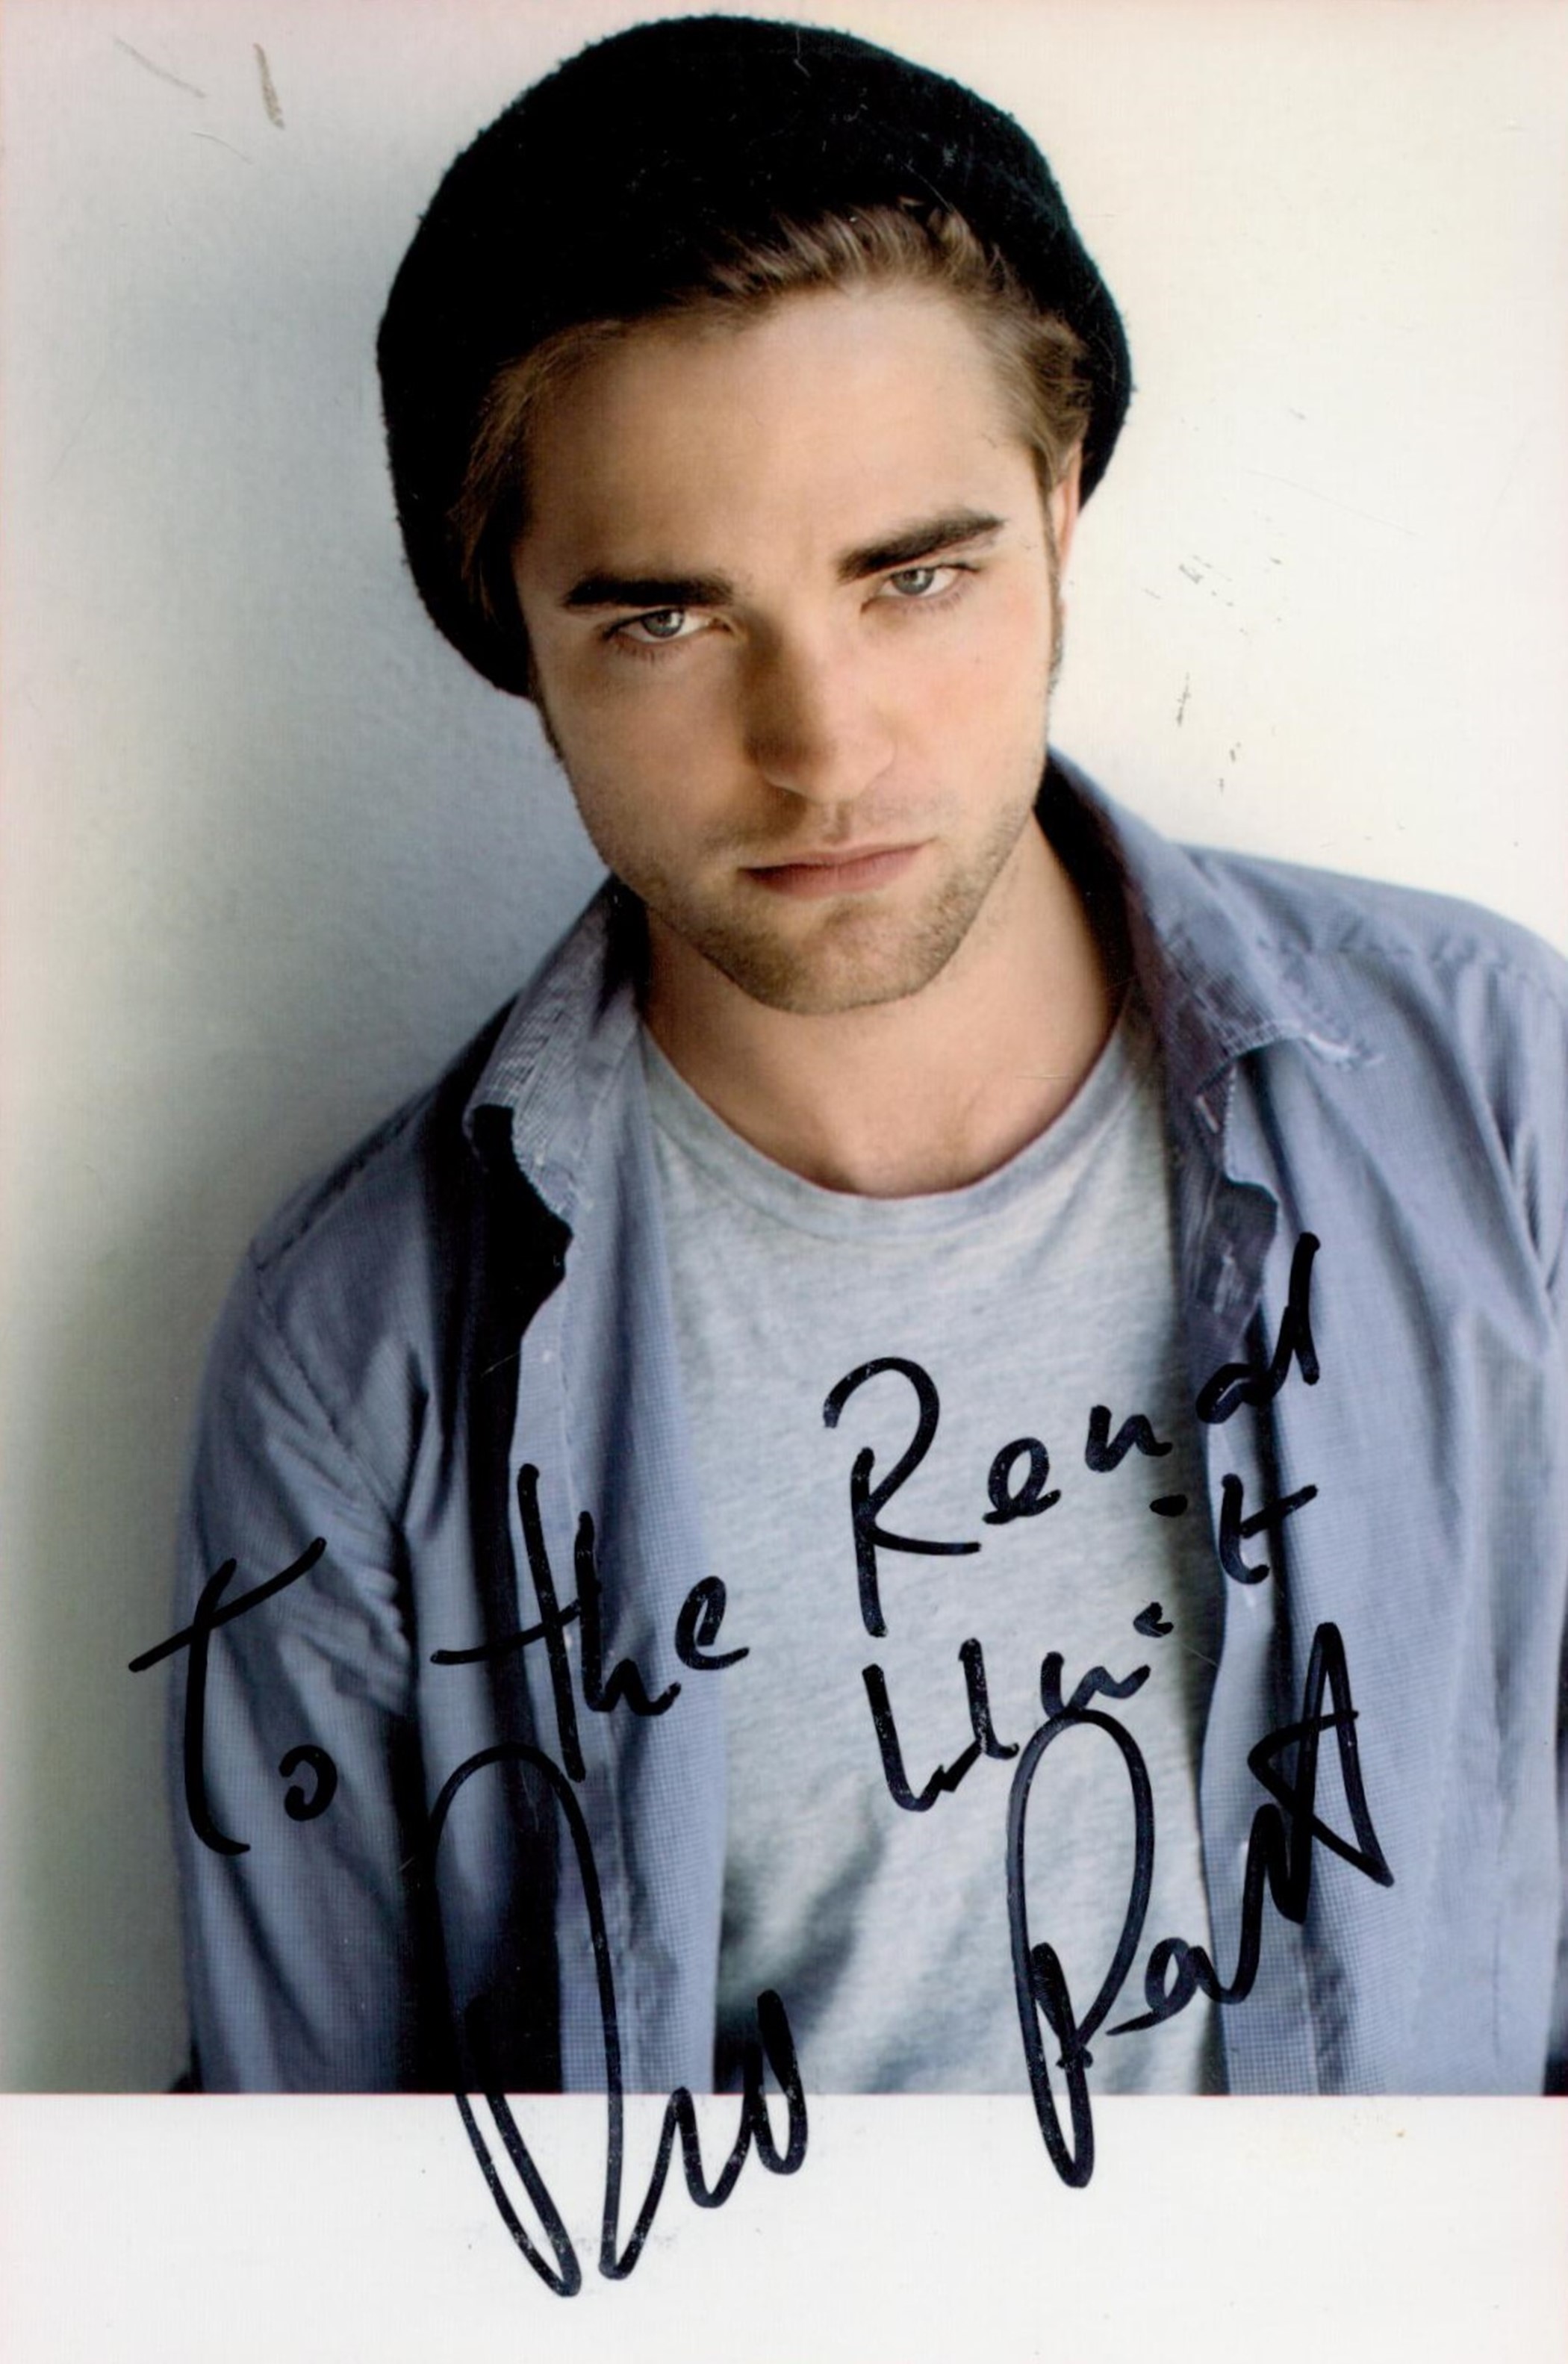 Robert Pattinson Signed 6x4 inch colour Photo. Good condition. All autographs come with a